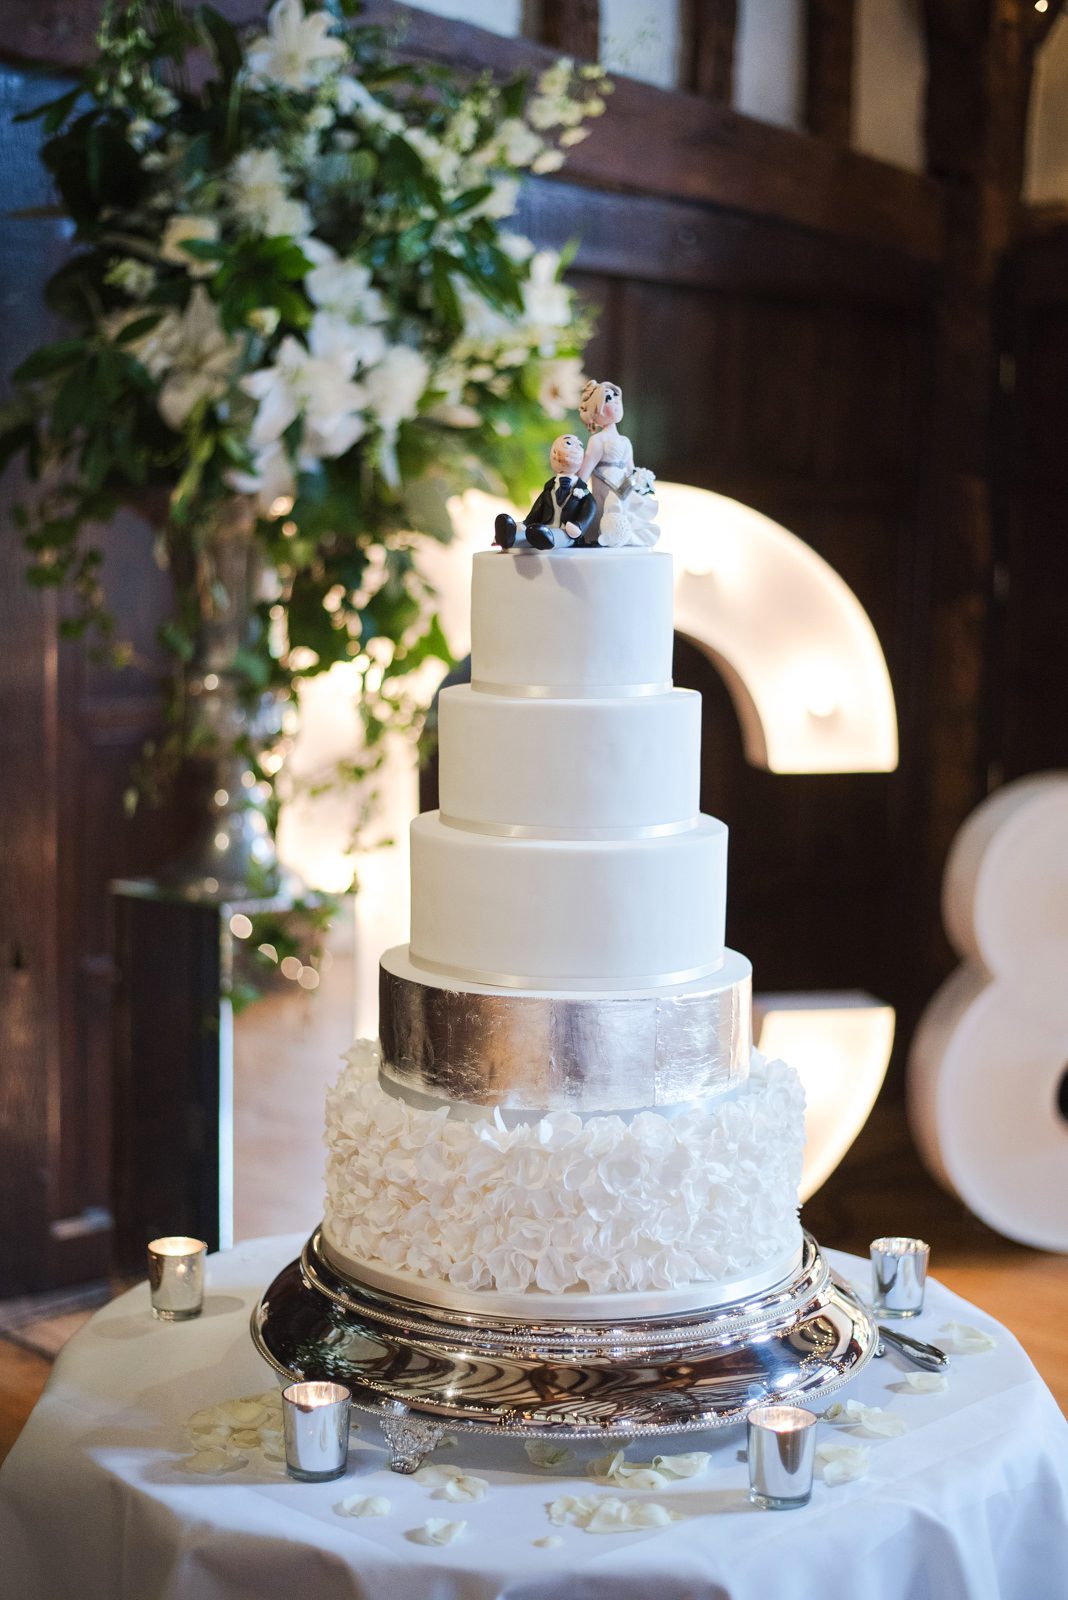 Silver and white wedding cake for a tithe barn wedding in Surrey.